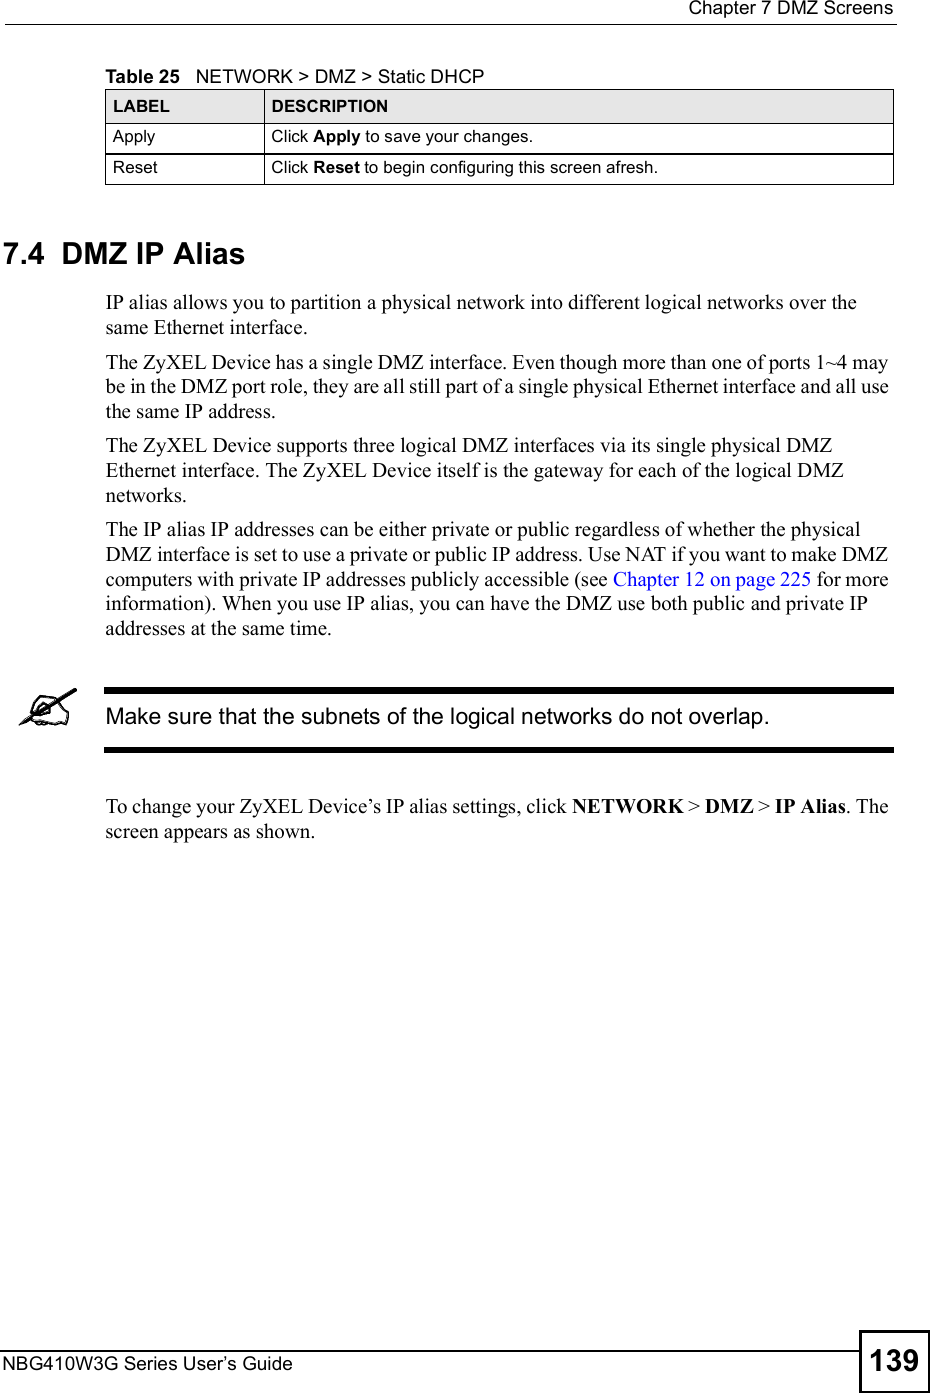  Chapter 7DMZ ScreensNBG410W3G Series User s Guide 1397.4  DMZ IP Alias  IP alias allows you to partition a physical network into different logical networks over the same Ethernet interface. The ZyXEL Device has a single DMZ interface. Even though more than one of ports 1~4 may be in the DMZ port role, they are all still part of a single physical Ethernet interface and all use the same IP address.The ZyXEL Device supports three logical DMZ interfaces via its single physical DMZ Ethernet interface. The ZyXEL Device itself is the gateway for each of the logical DMZ networks.The IP alias IP addresses can be either private or public regardless of whether the physical DMZ interface is set to use a private or public IP address. Use NAT if you want to make DMZ computers with private IP addresses publicly accessible (see Chapter 12 on page 225 for more information). When you use IP alias, you can have the DMZ use both public and private IP addresses at the same time.Make sure that the subnets of the logical networks do not overlap.To change your ZyXEL Device!s IP alias settings, click NETWORK &gt; DMZ &gt; IP Alias. The screen appears as shown.ApplyClick Apply to save your changes.ResetClick Reset to begin configuring this screen afresh.Table 25   NETWORK &gt; DMZ &gt; Static DHCPLABEL DESCRIPTION